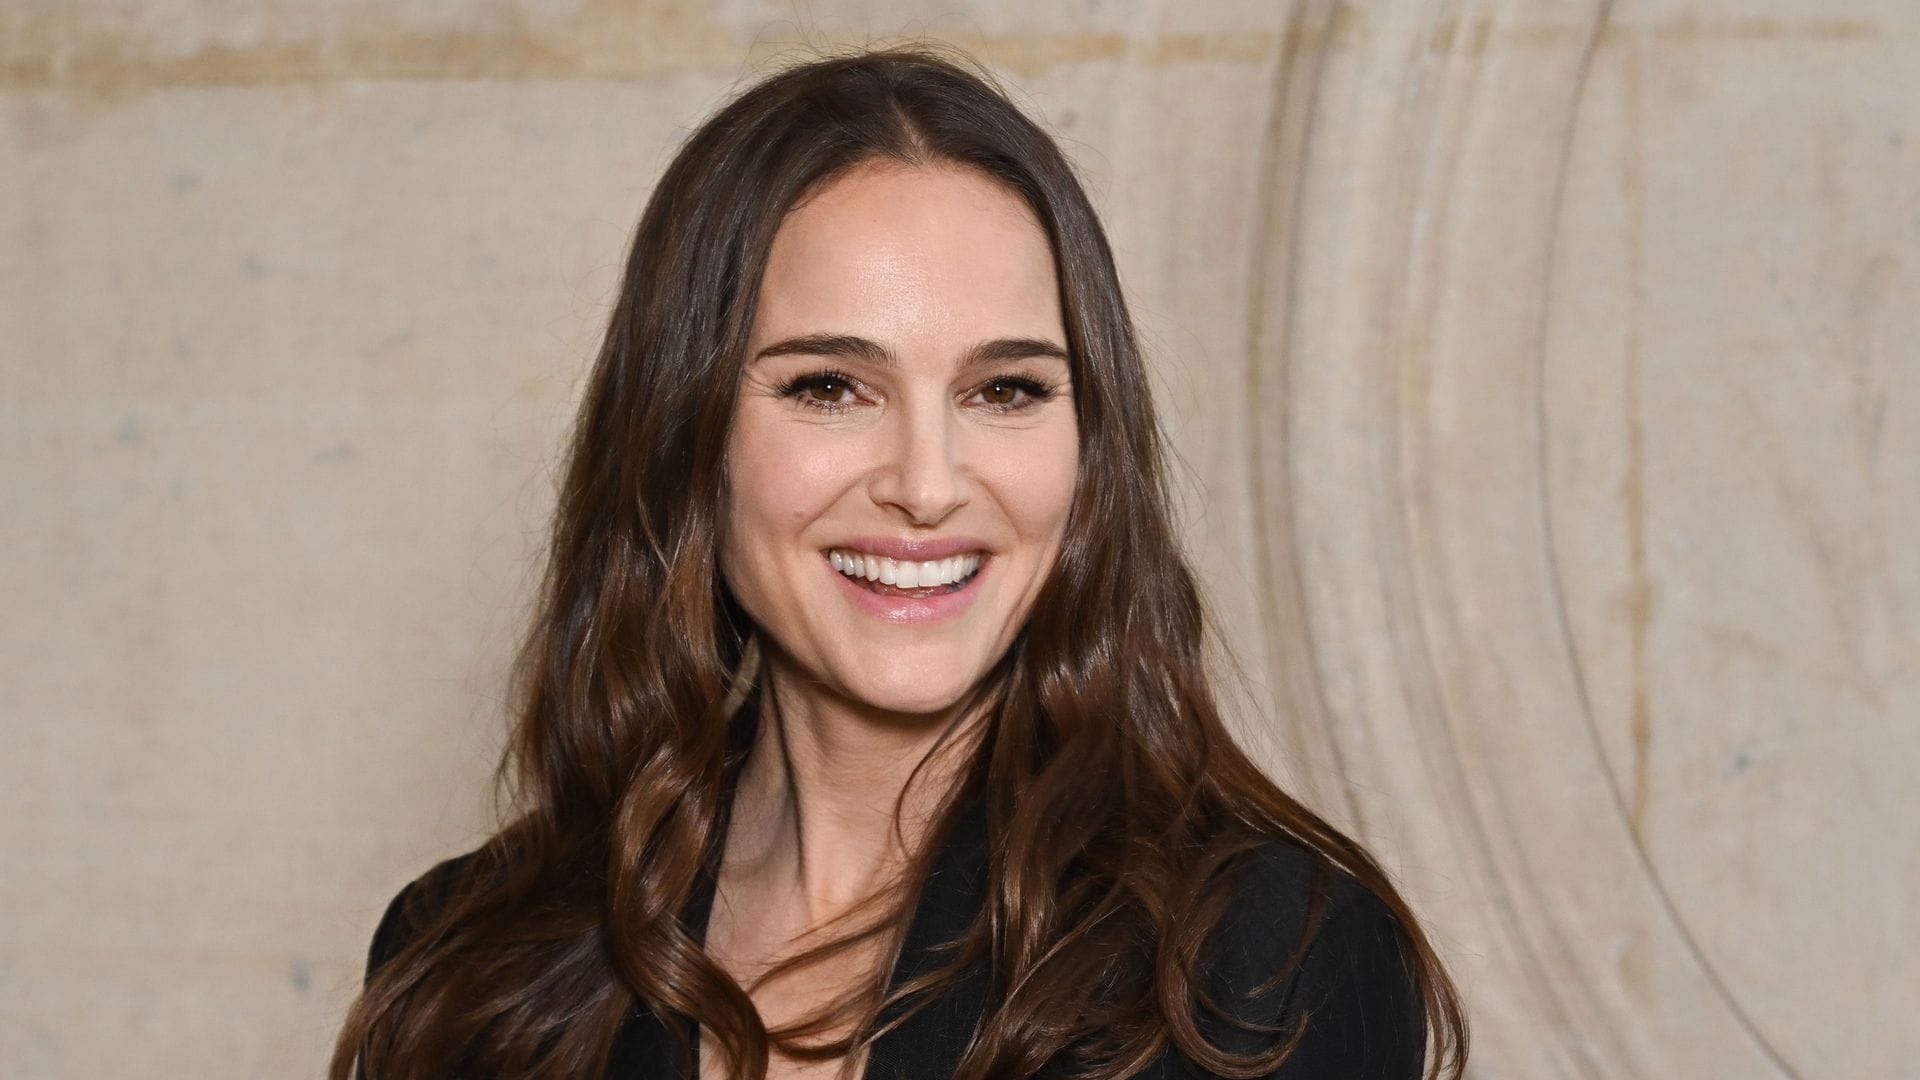 Natalie Portman says her encounter with Rihanna was "exactly" what she needed after her divorce